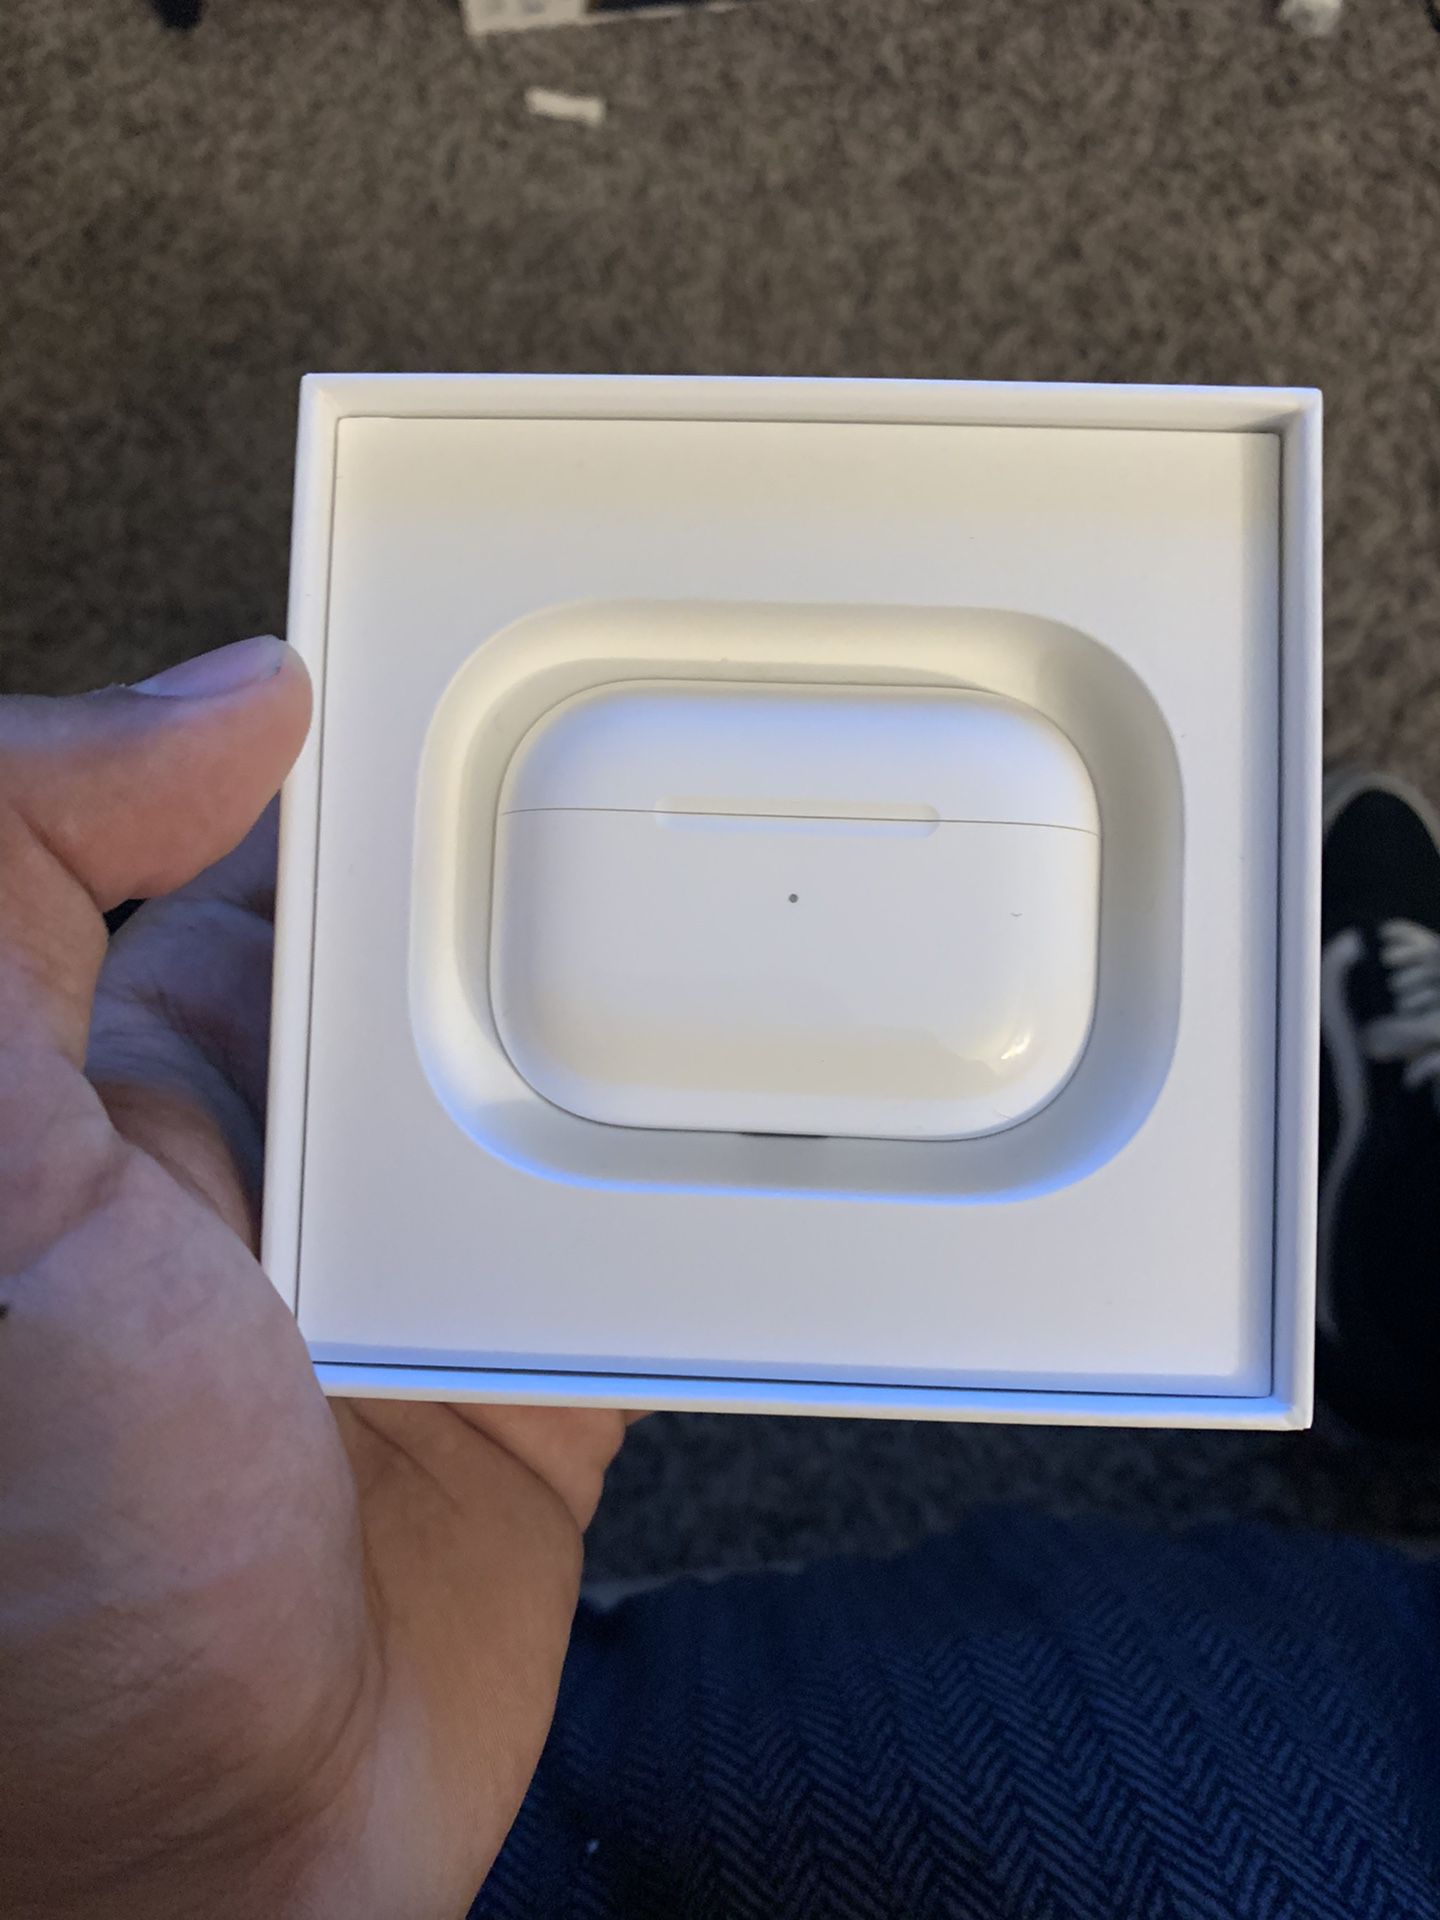 AirPods Pro wireless charging case.